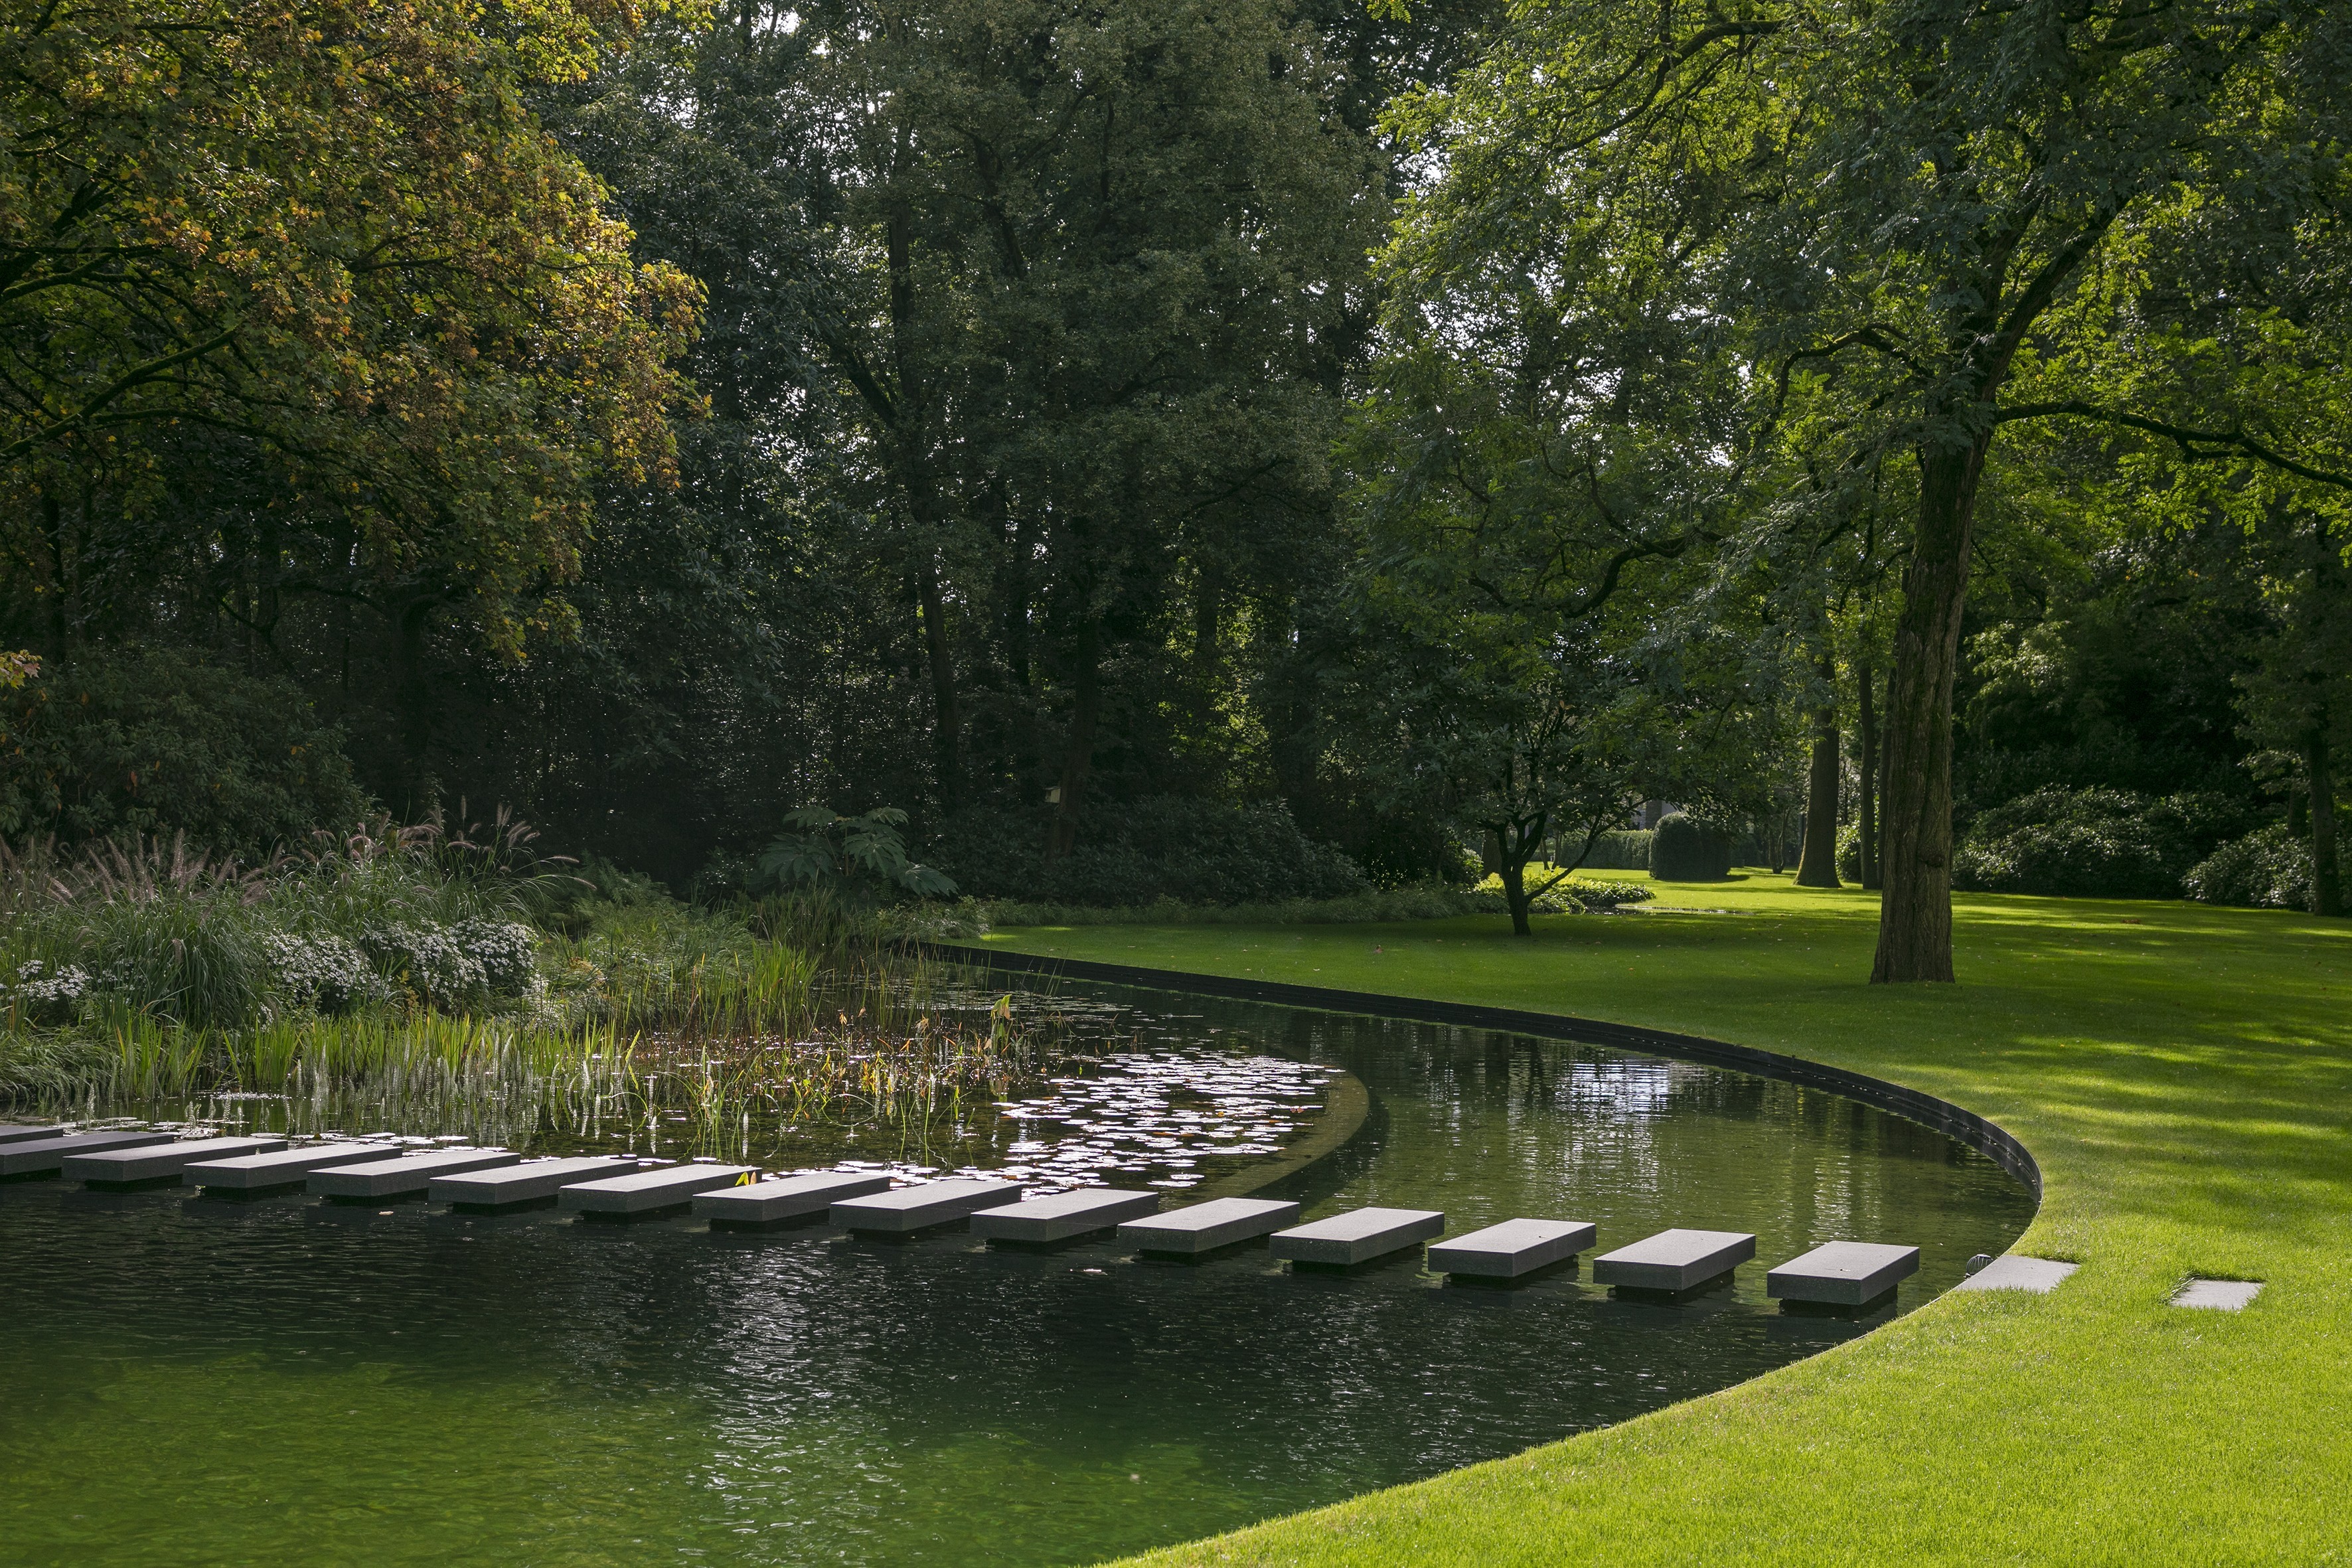 swimming-pond-in-private-landscaped-park-Het-Gooi-NL-detail